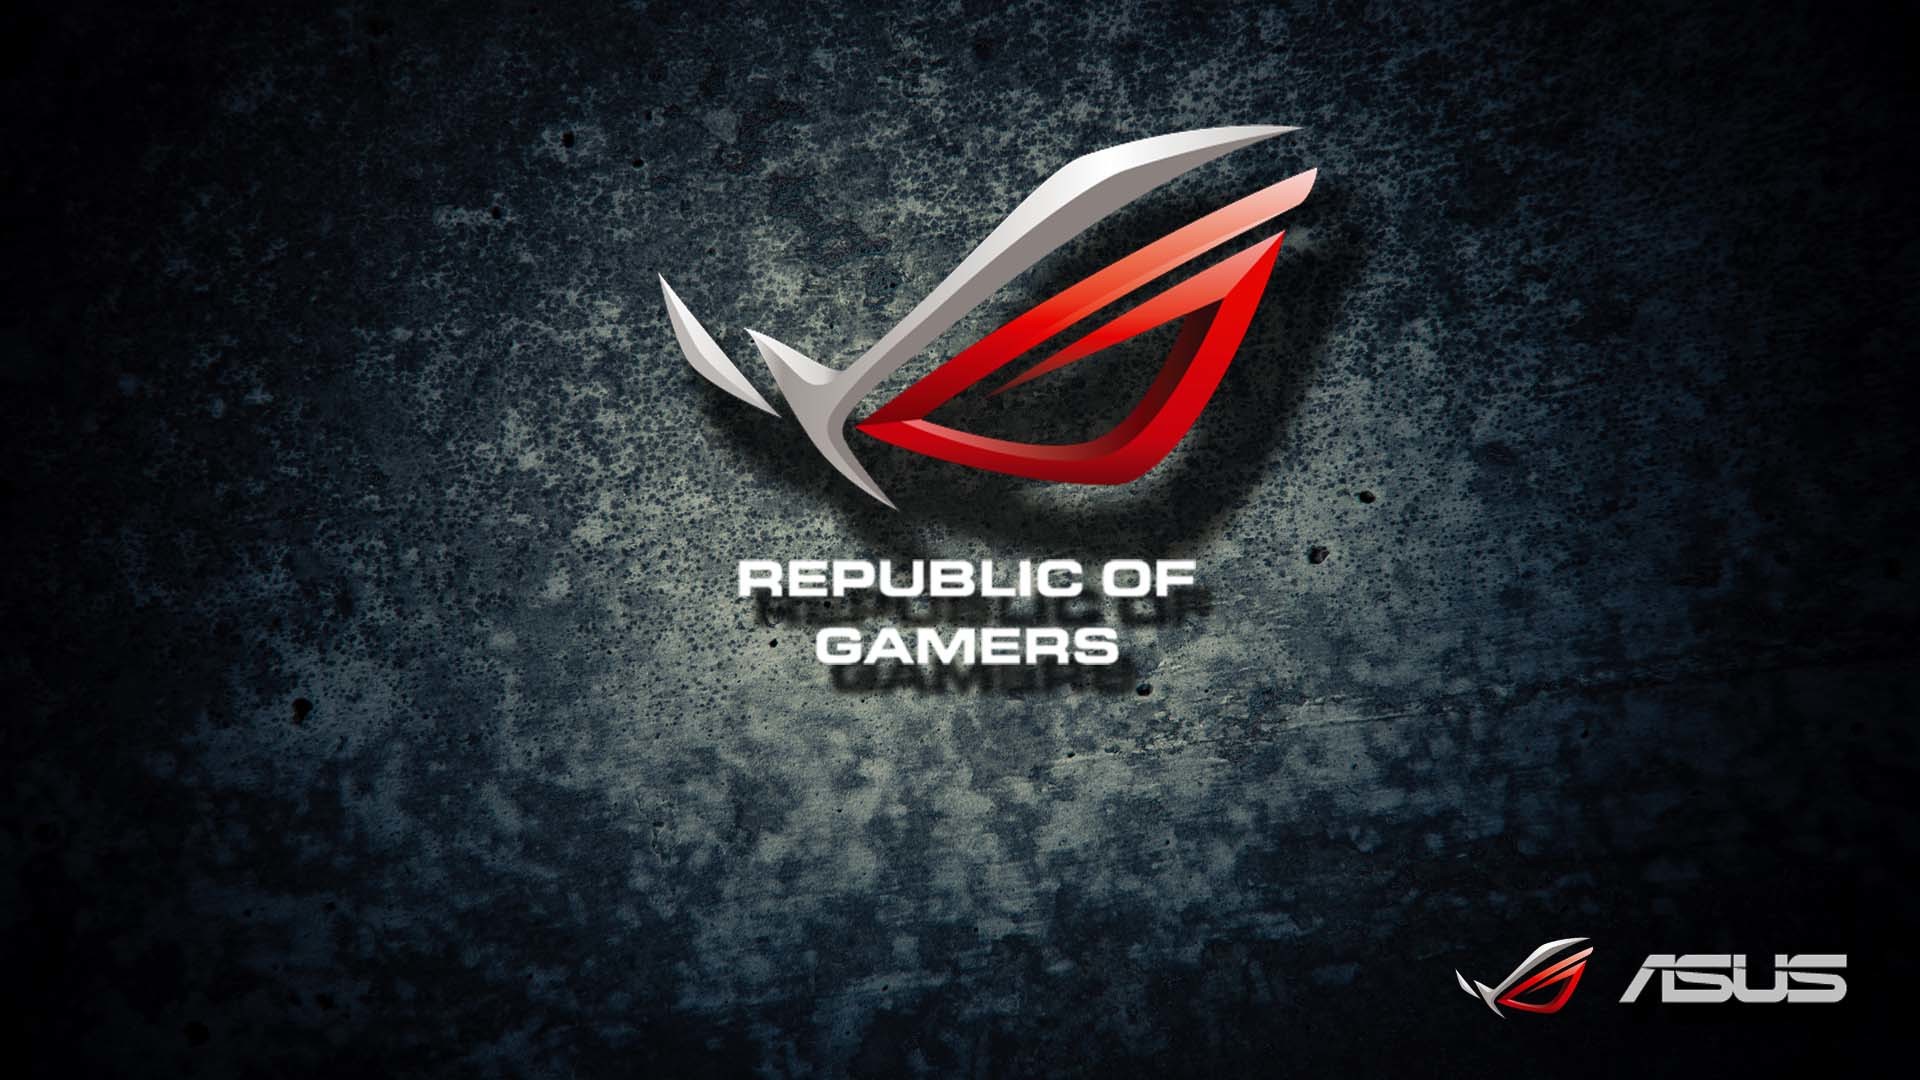 Wallpaper Competition Vote For Your Favorite – Republic of Gamers